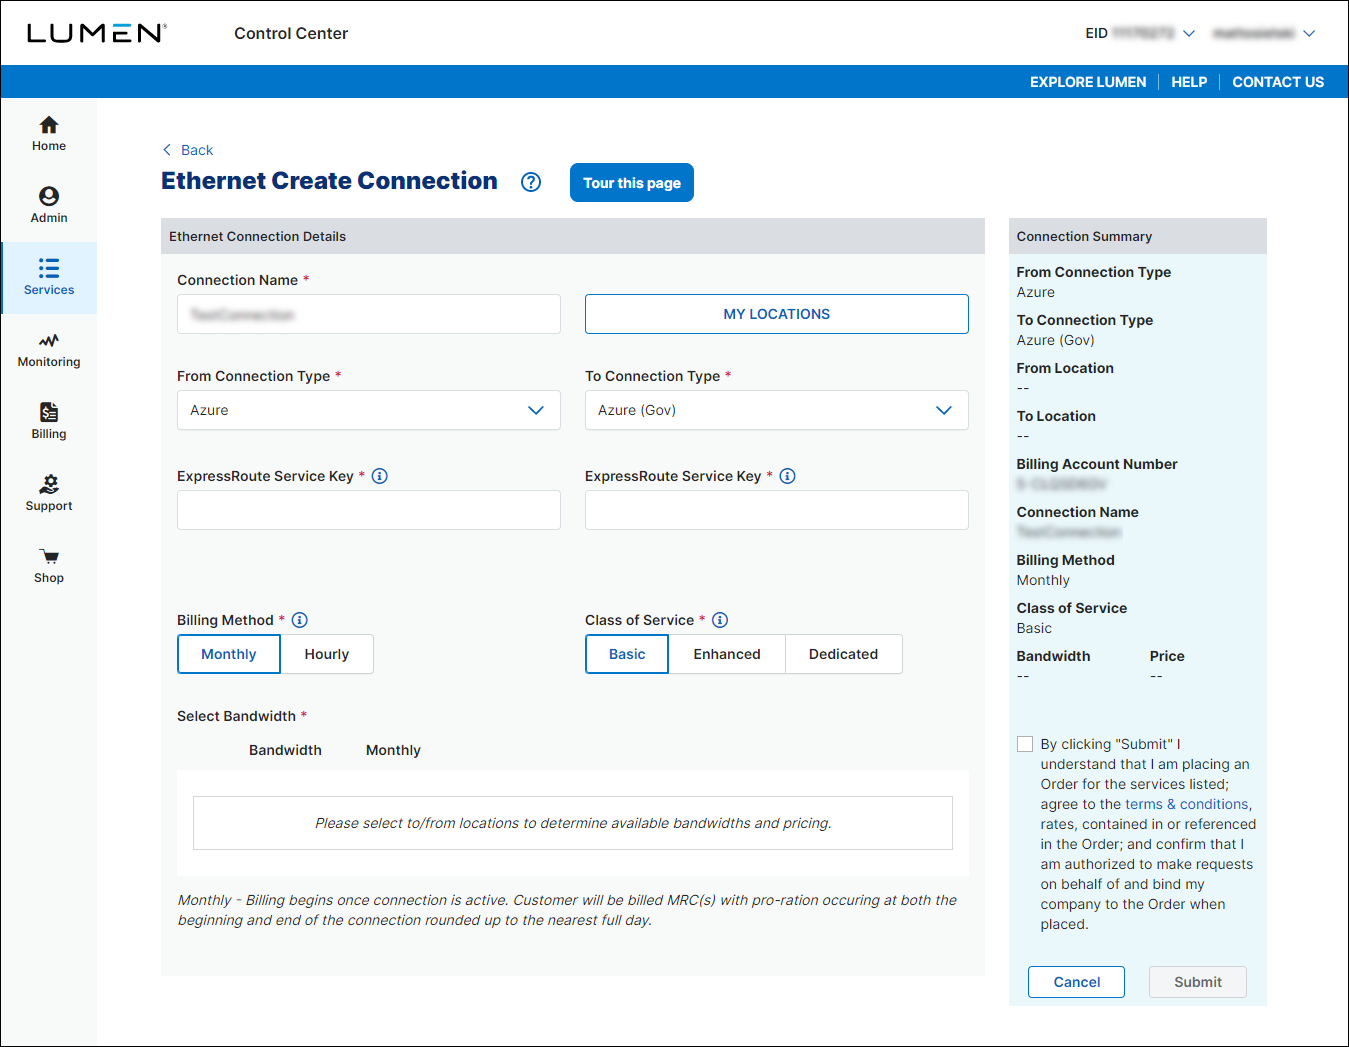 Ethernet Create Connection (showing a connection from Azure to Azure Gov)